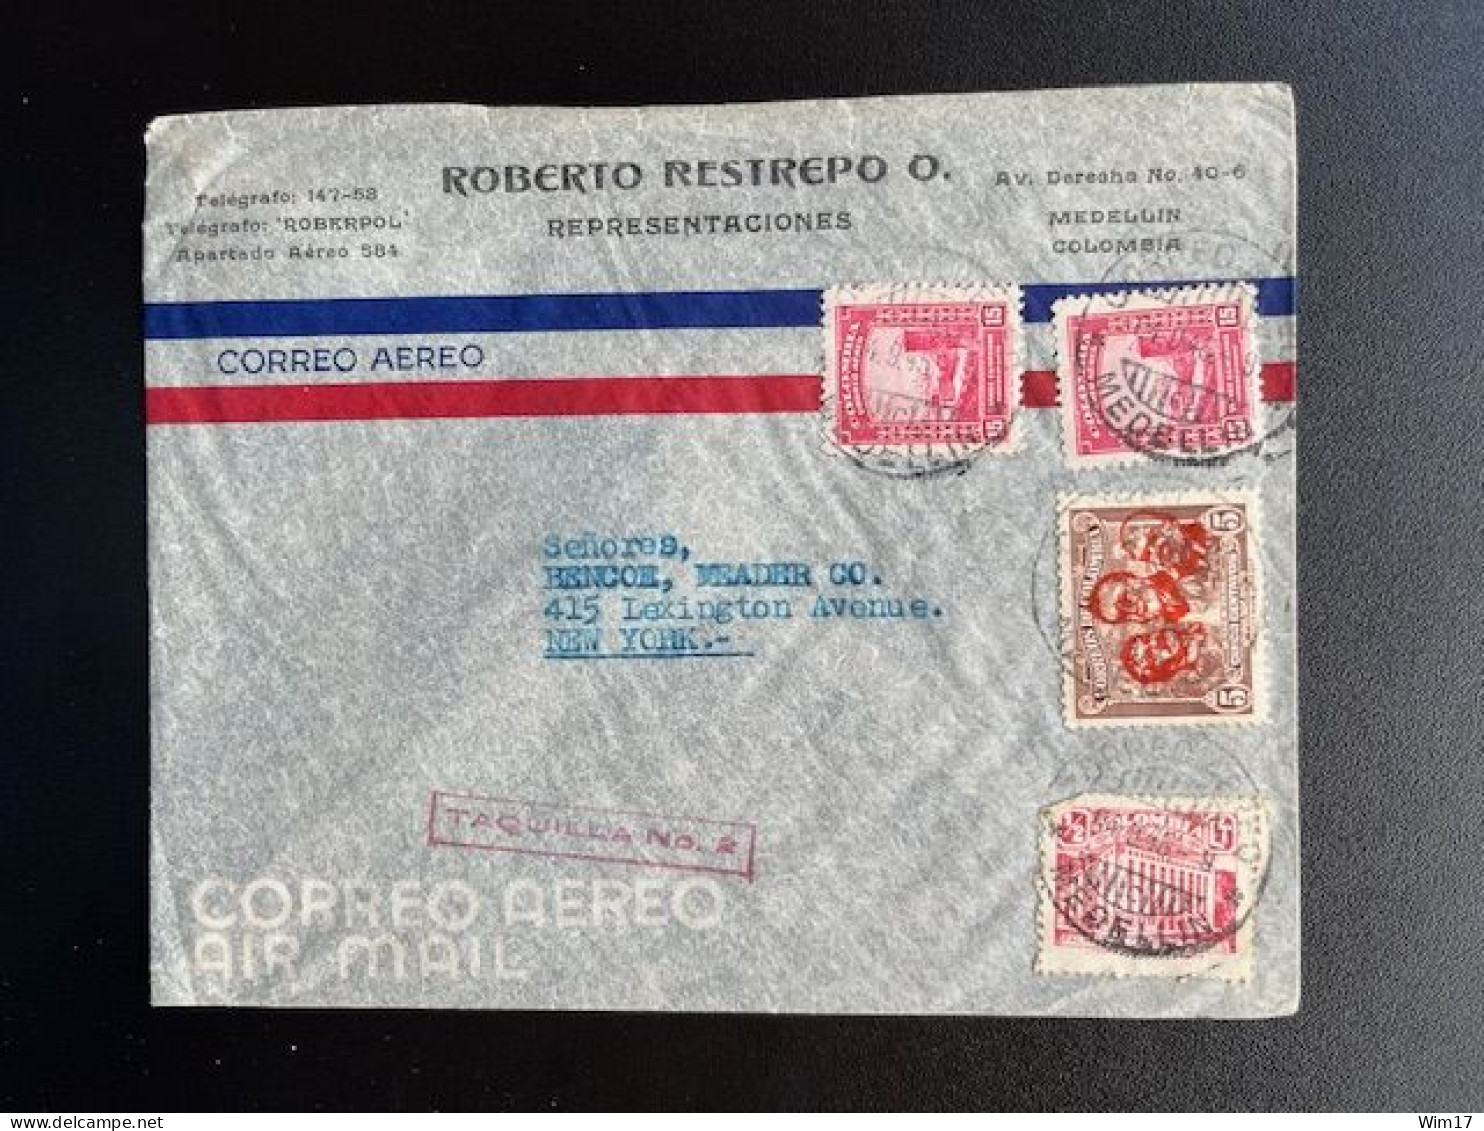 COLOMBIA 1945 AIR MAIL LETTER MEDELLIN TO NEW YORK 04-09-1945 - Kolumbien